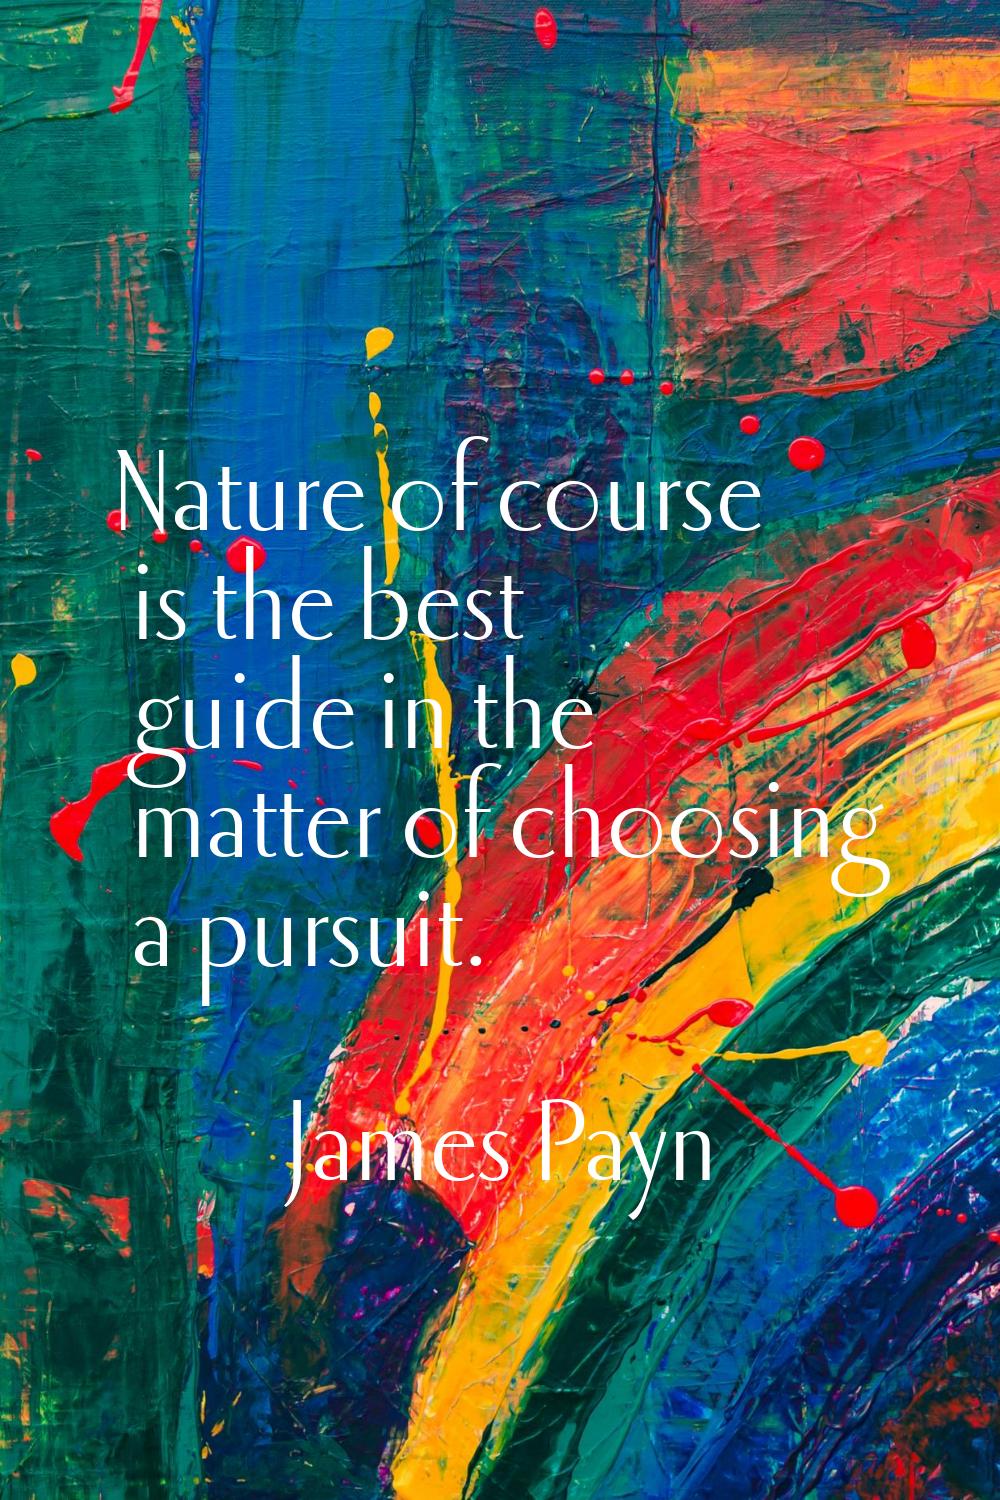 Nature of course is the best guide in the matter of choosing a pursuit.